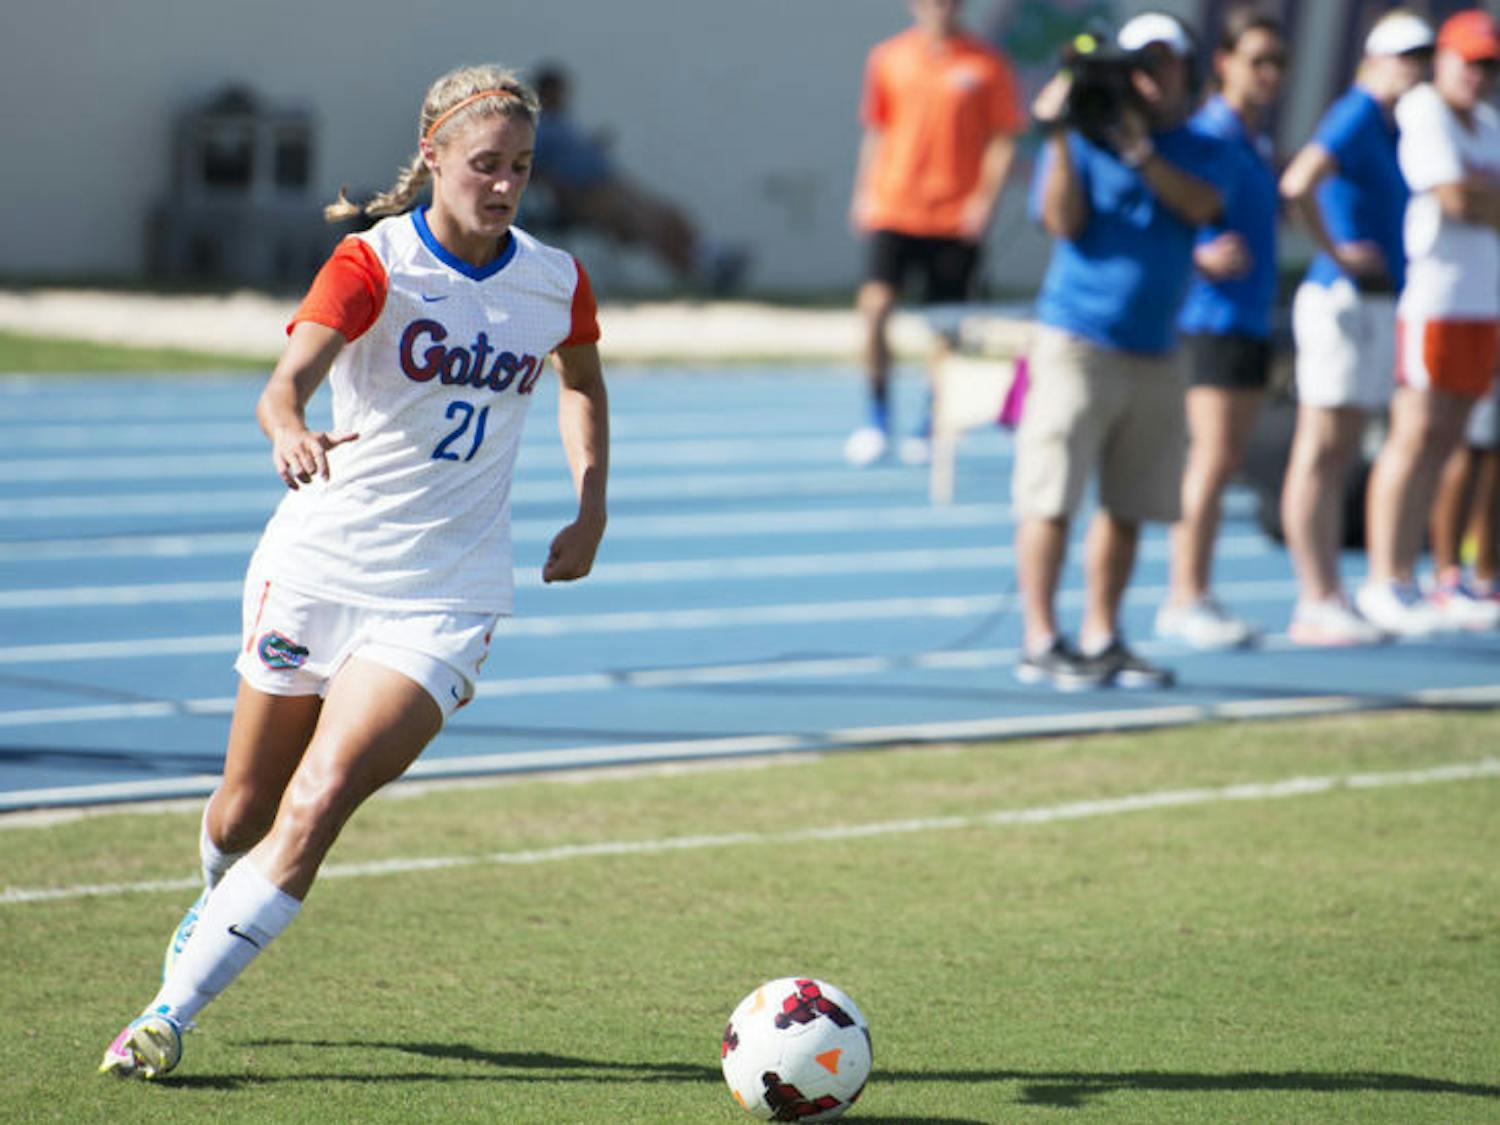 Jillian Graff dribbles the ball during Florida’s 3-0 victory against Auburn on Oct. 6 at James G. Pressly Stadium. The junior lost her father to lung cancer in 2012 but fights on in his memory.